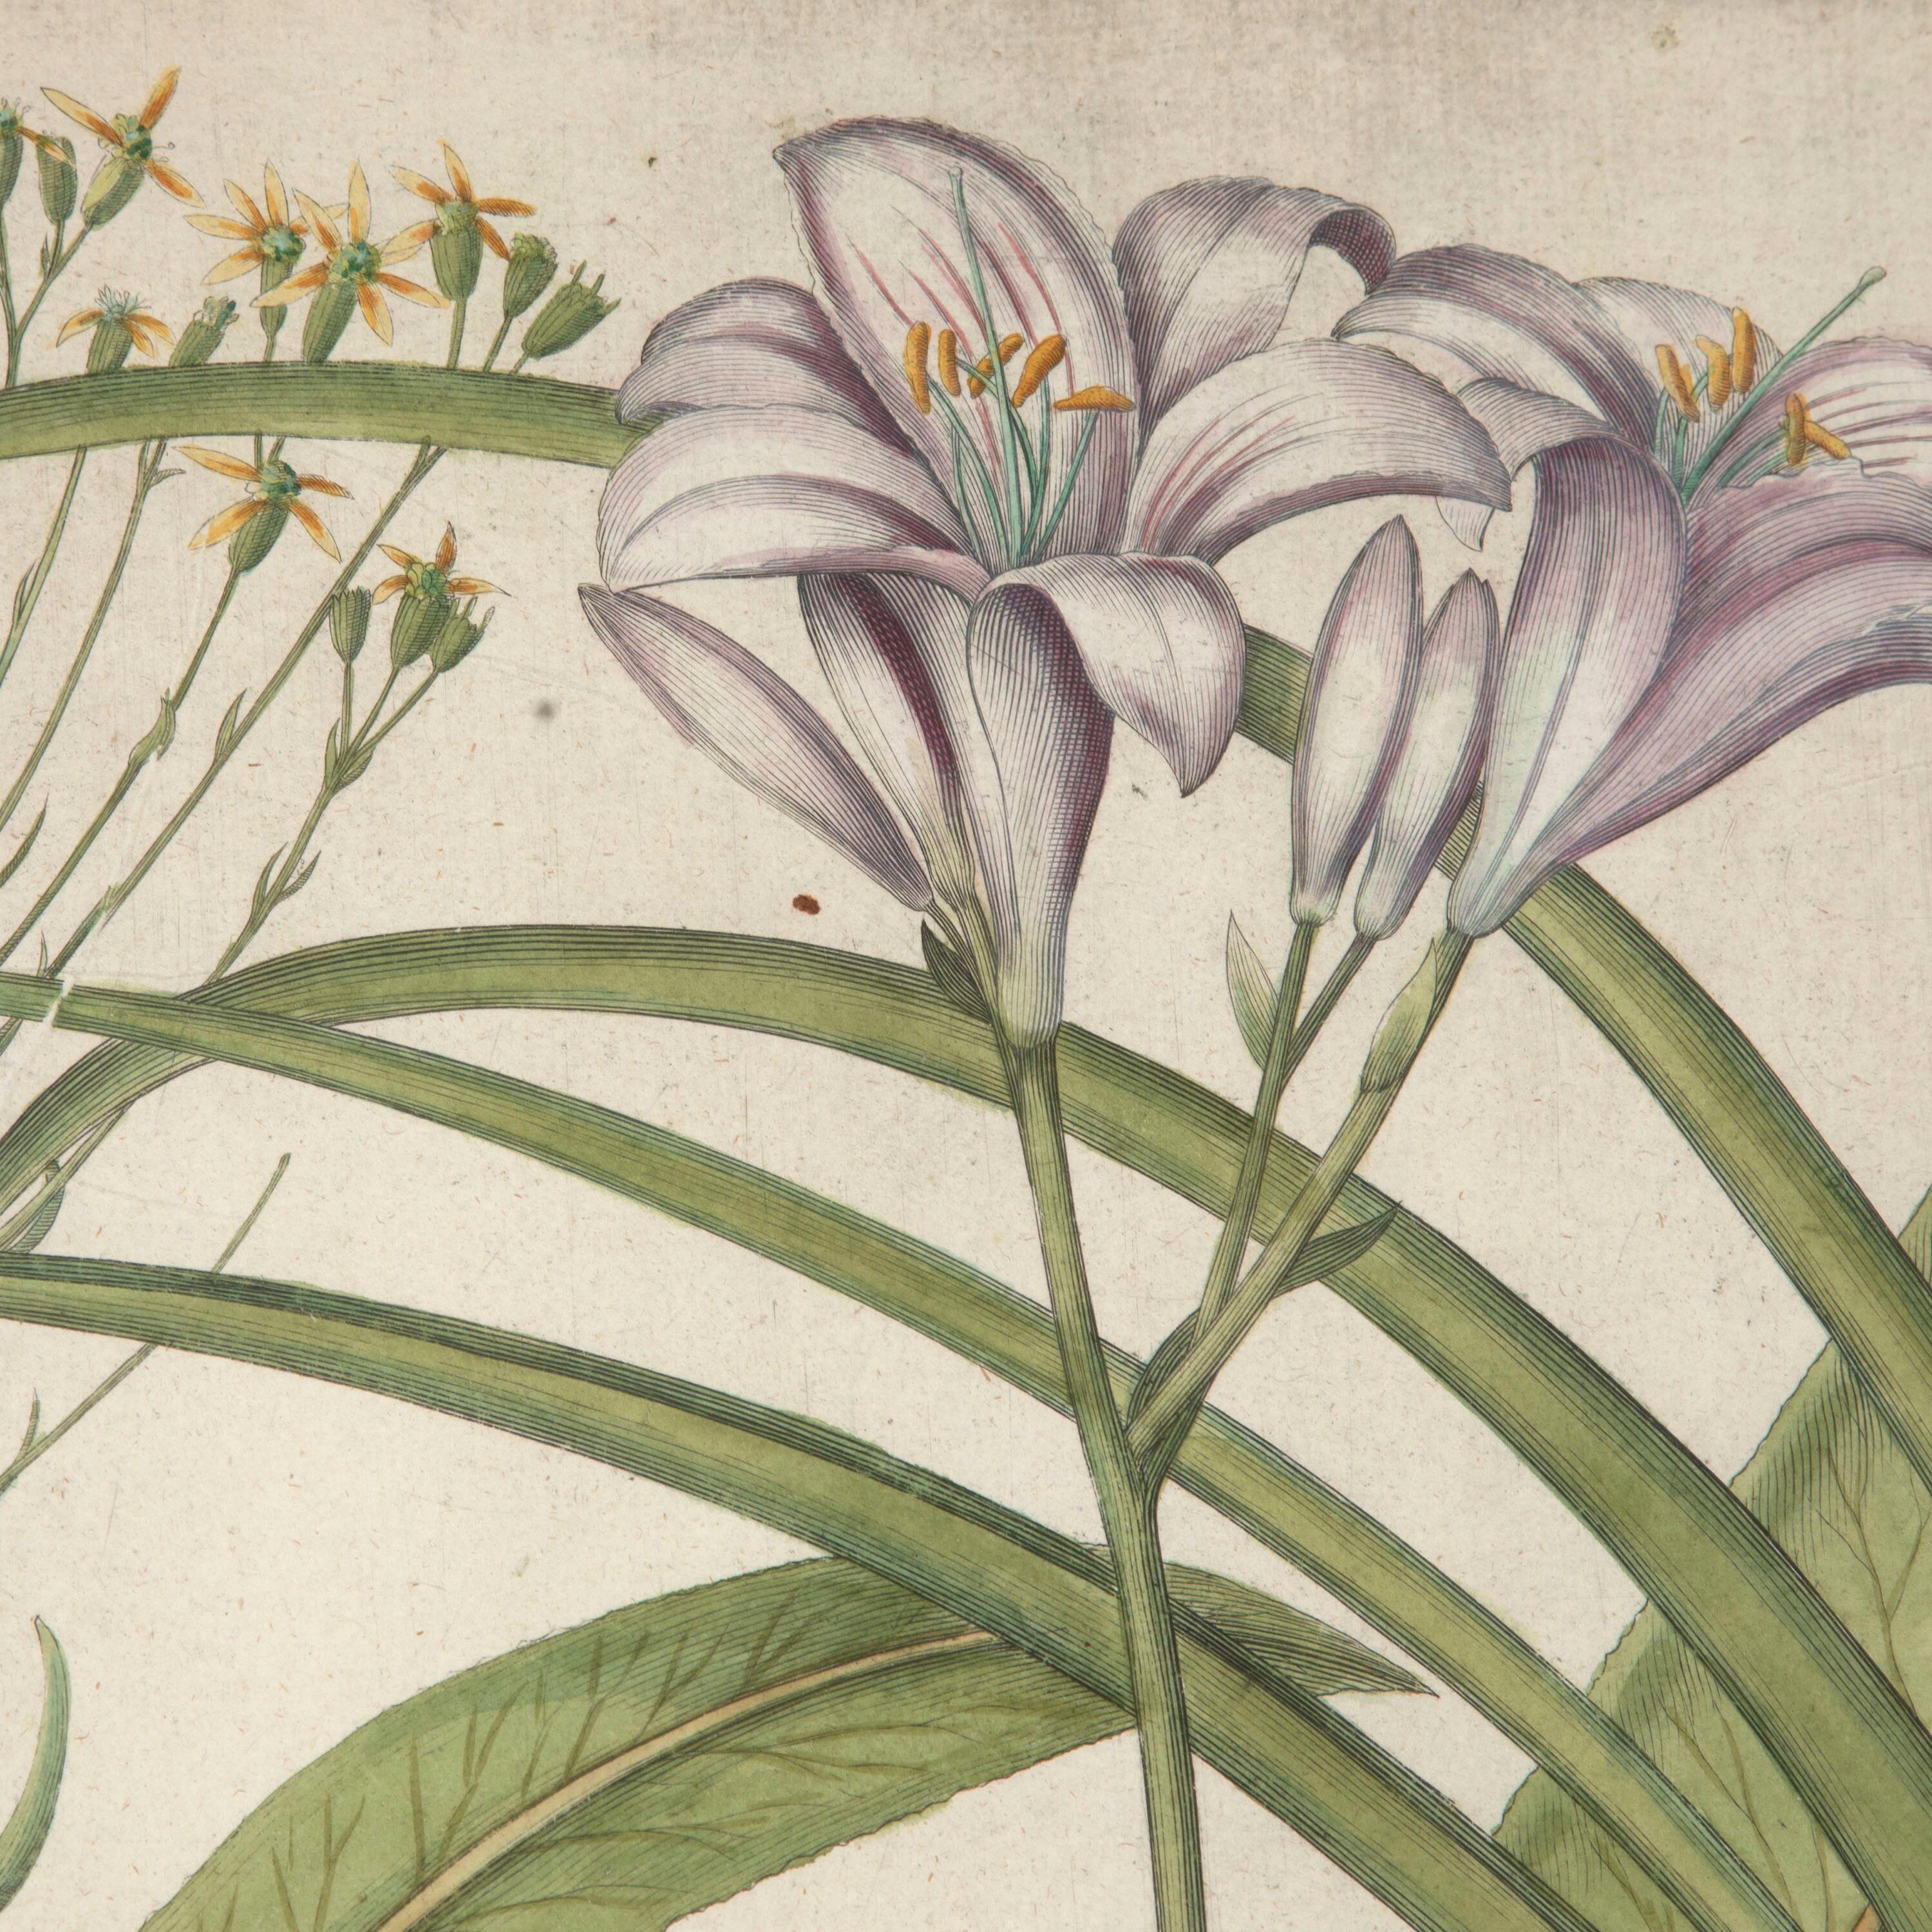 Stunning 17th century Tawny Day Lilly botanical engraving, by Basilius Besler. 

Basilius Besler (1561-1629) was a prominent botanist and apothecarist in Nuremberg. He was tasked with curating the garden of Johann Konrad von Gemmingen, the Prince